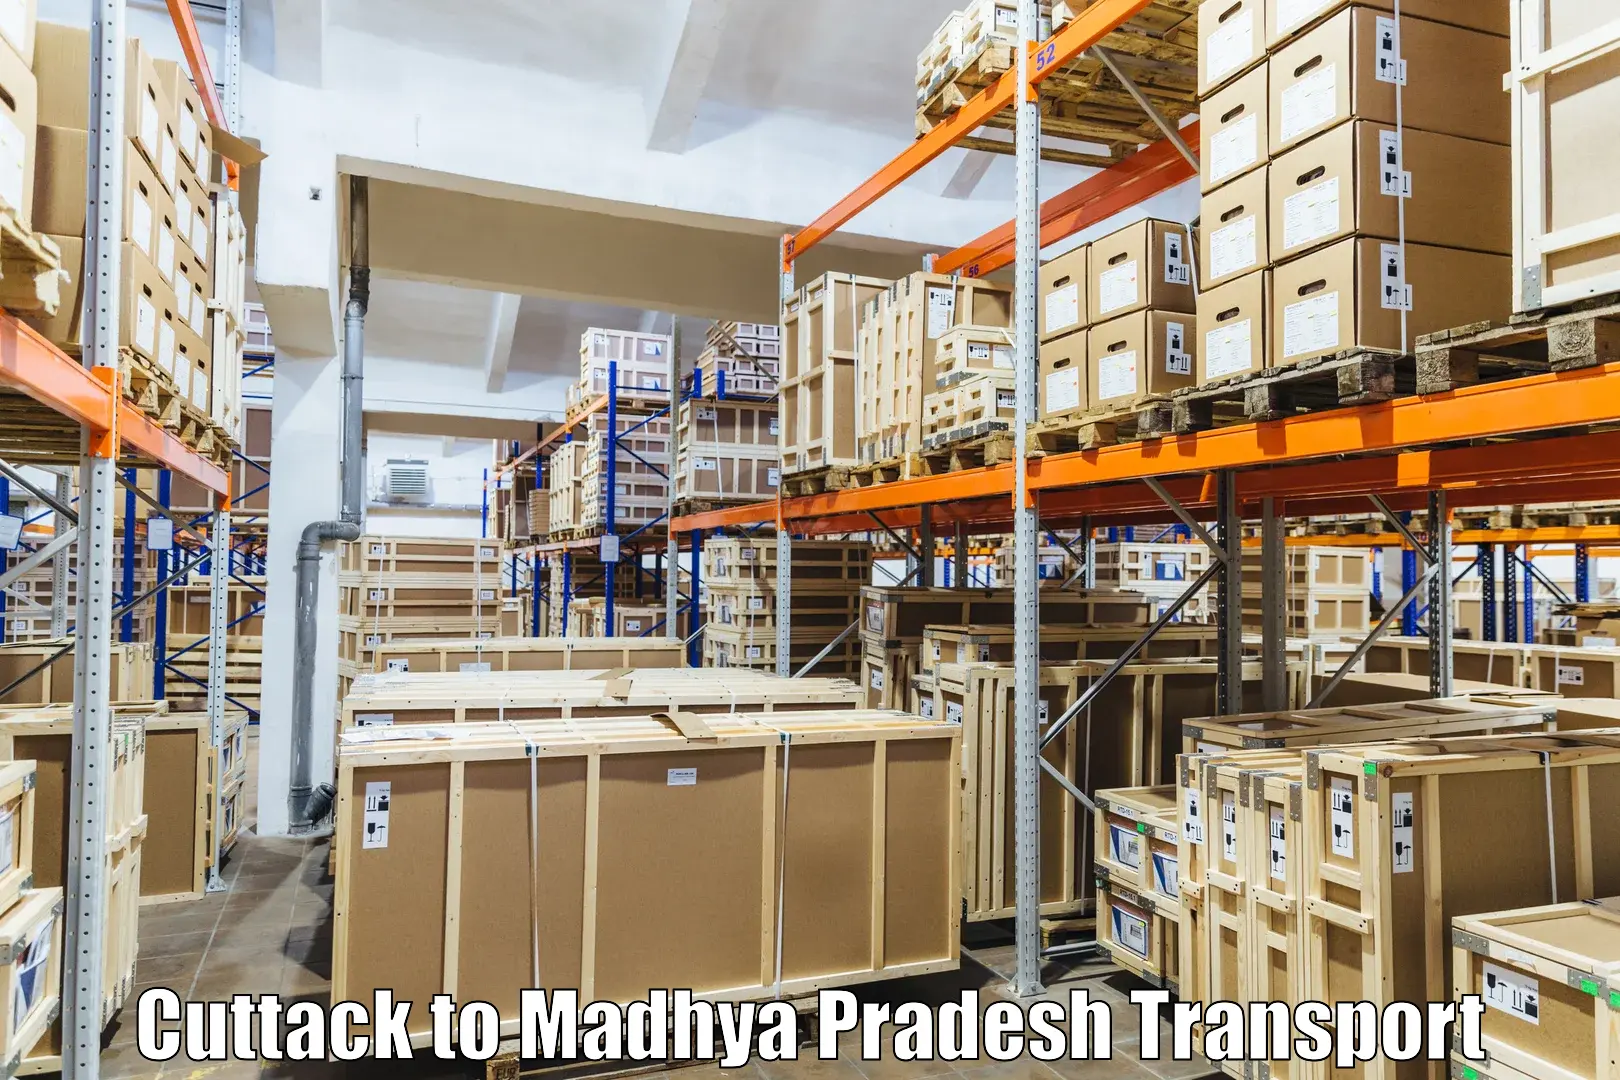 Truck transport companies in India Cuttack to Burhanpur